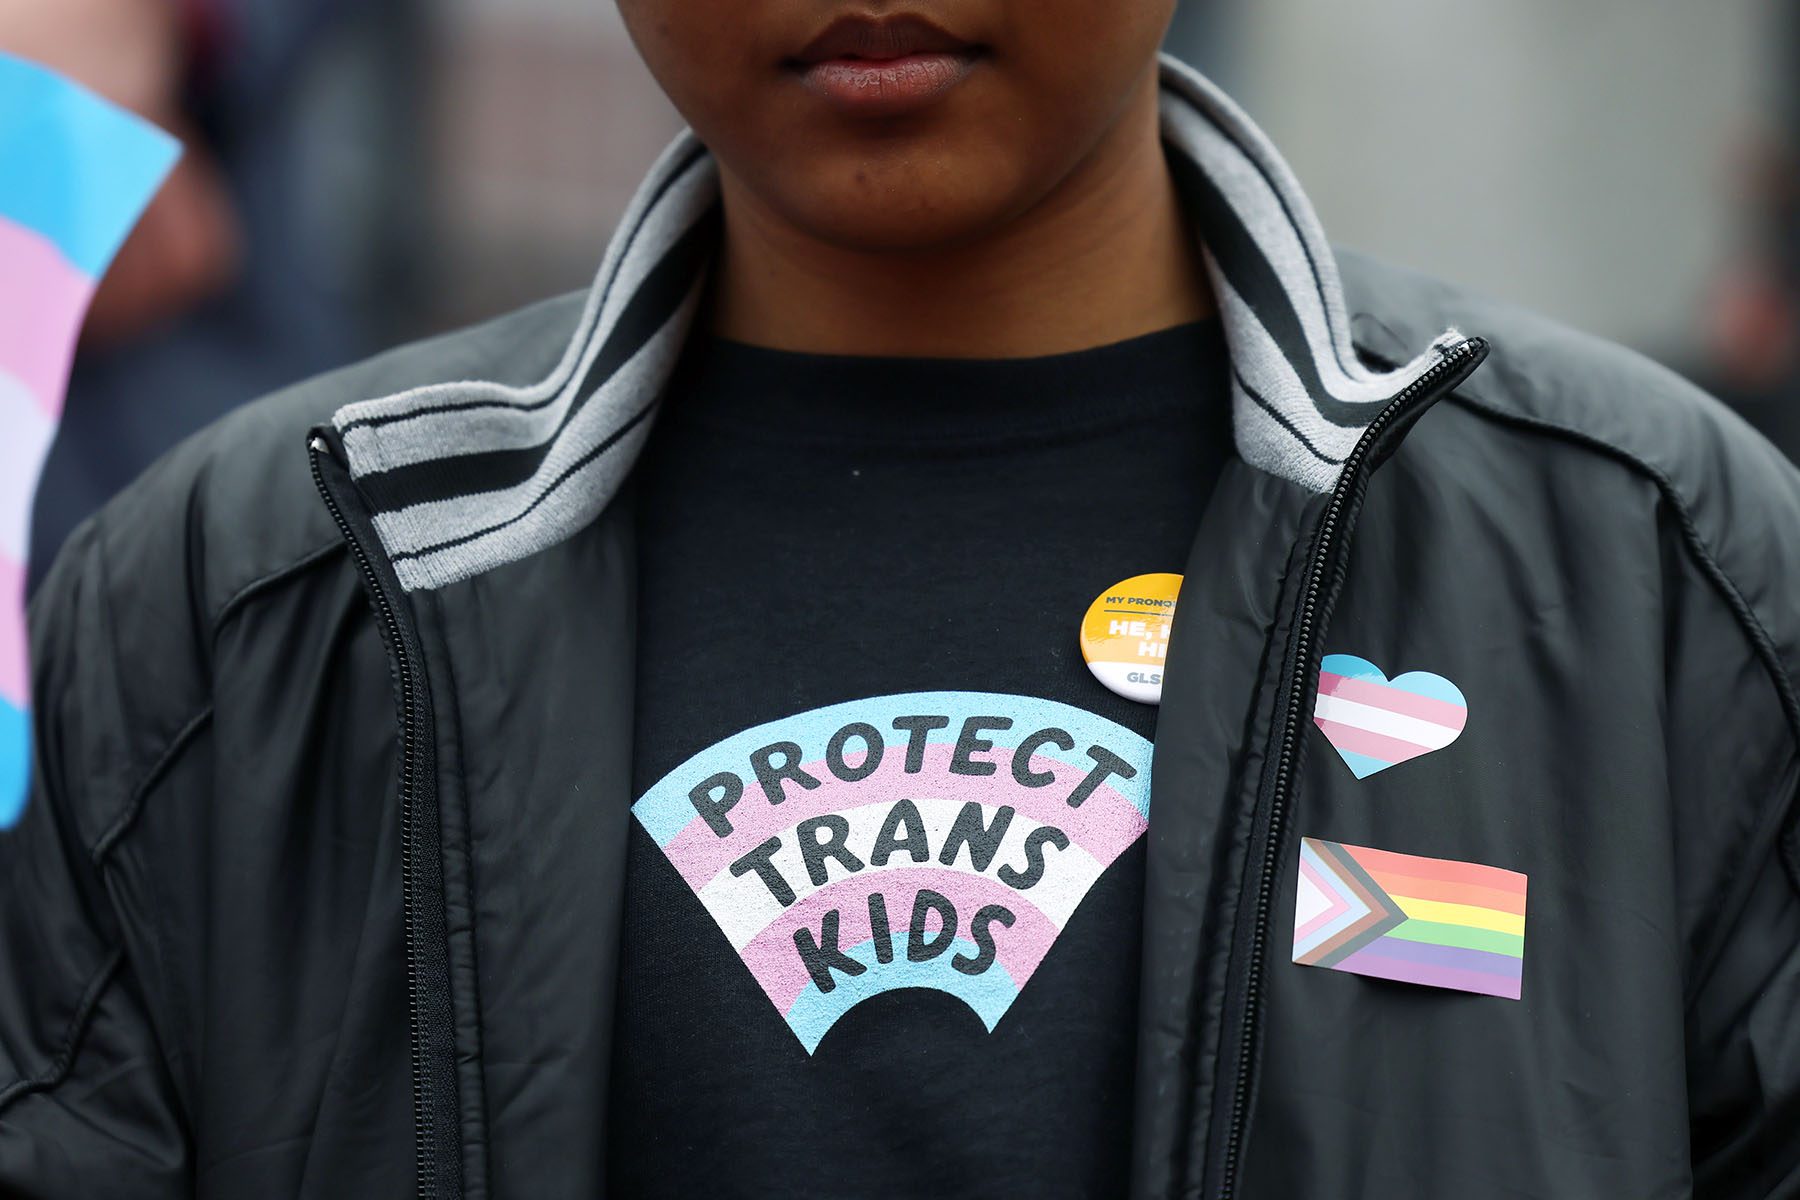 A person wearing a "protect trans kids" shirt takes part in a rally during a Transgender Day of Visibility event.